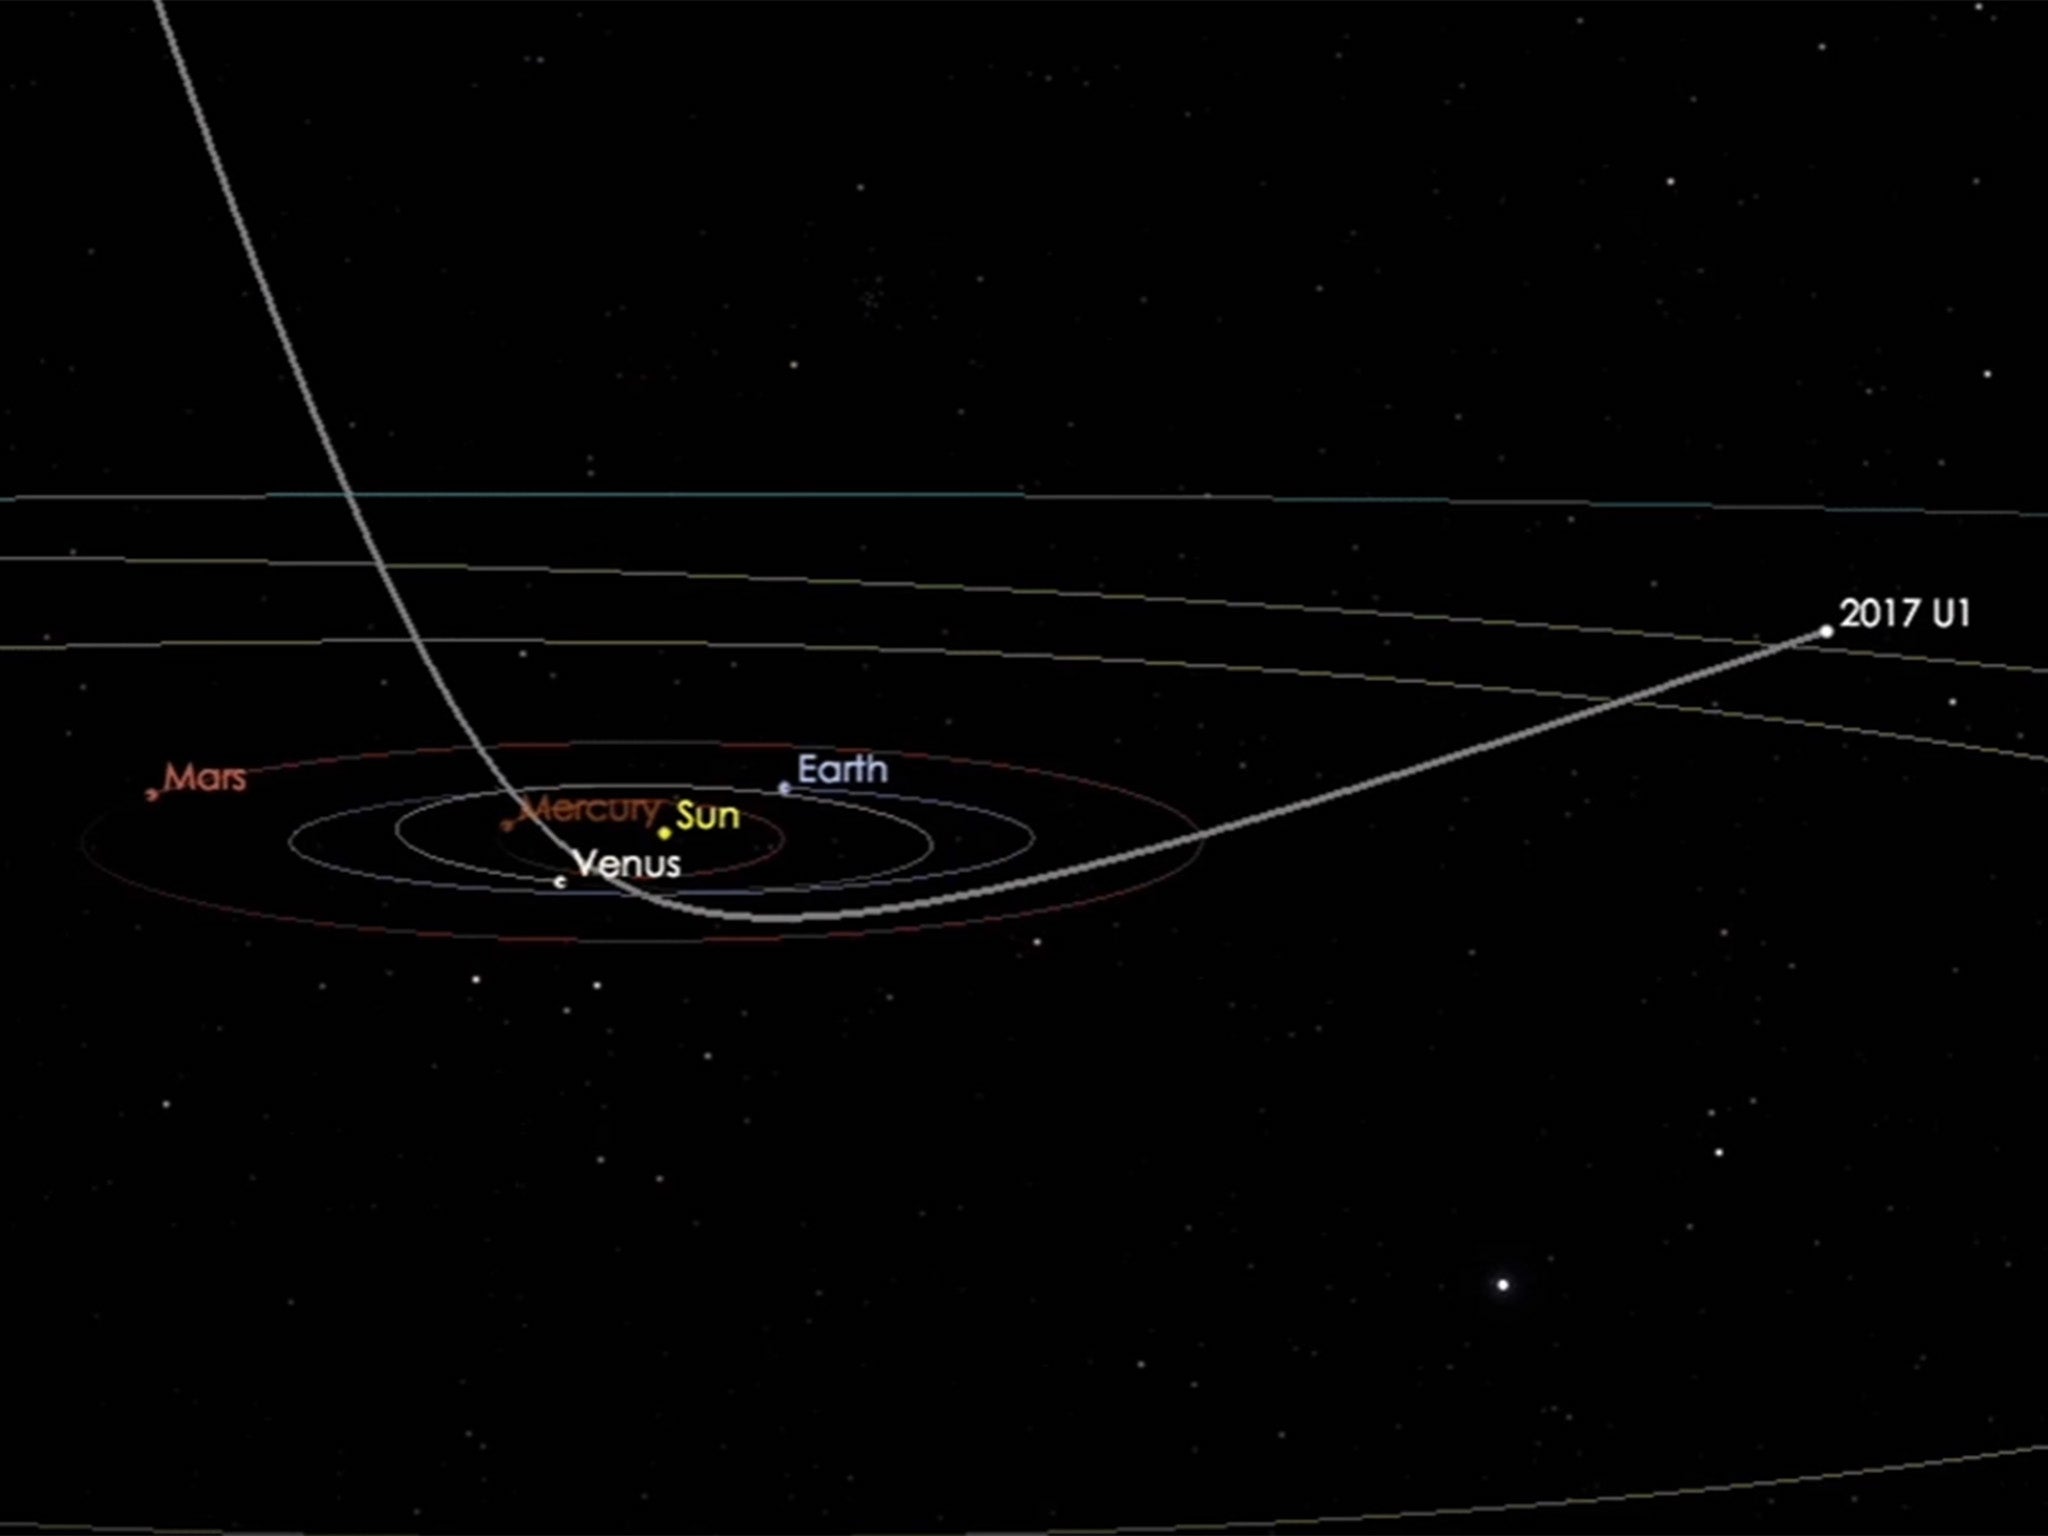 Oumuamua, an interstellar asteroid, passing through our solar system